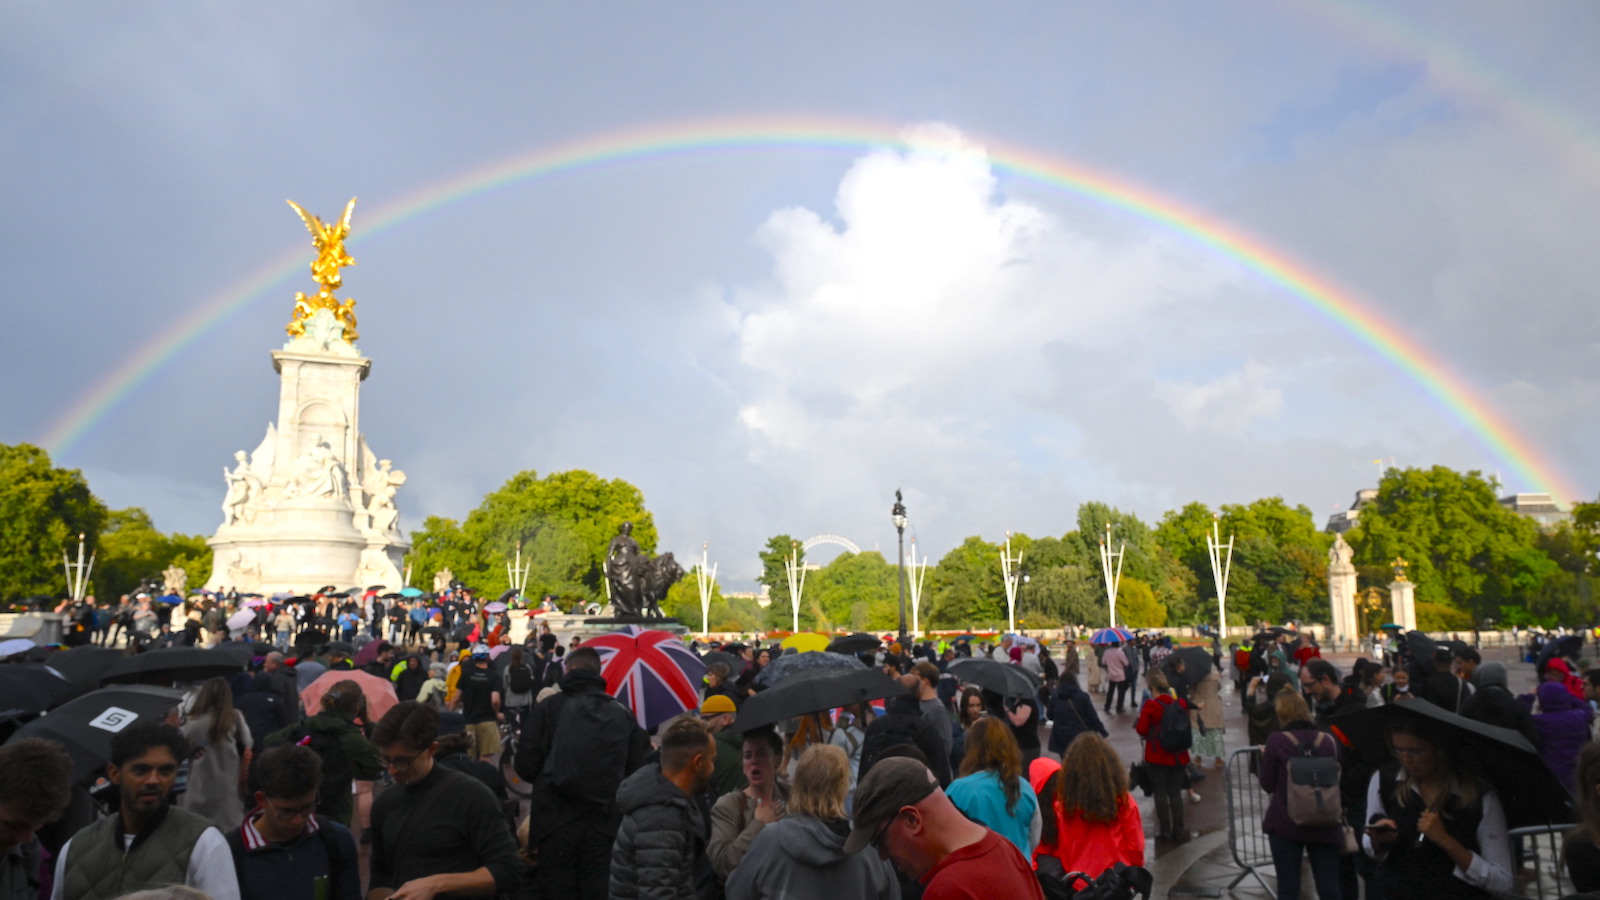 A rainbow appears above Buckingham Palace on the day of Queen Elizabeth II's death